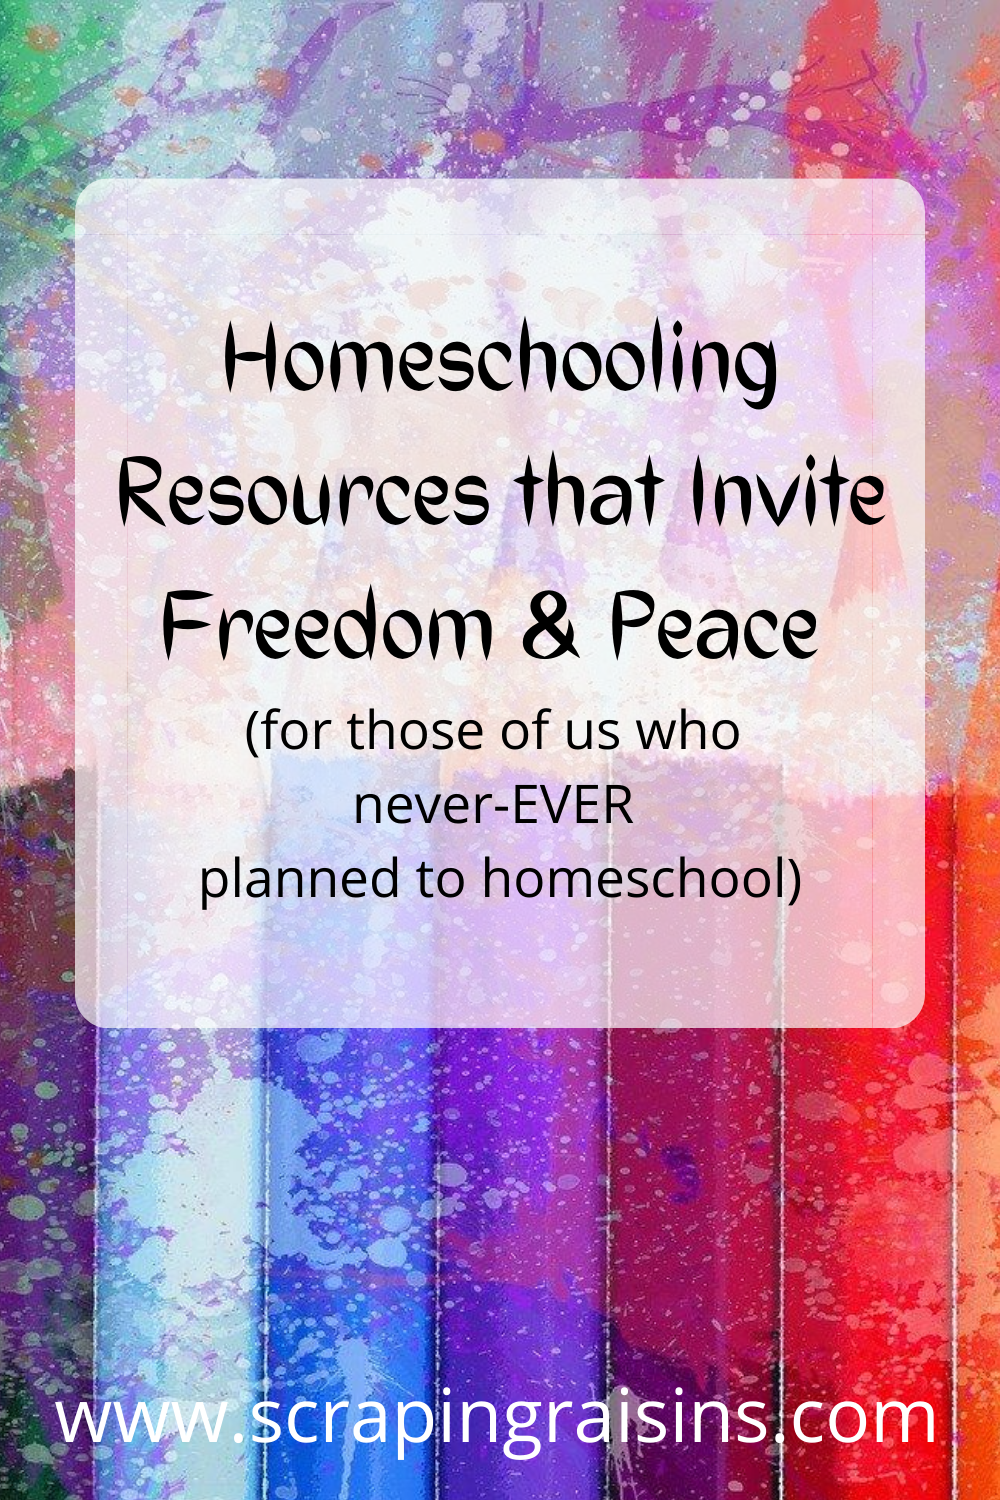 Podcasts, books, and curriculum ideas for the reluctant homeschooler.